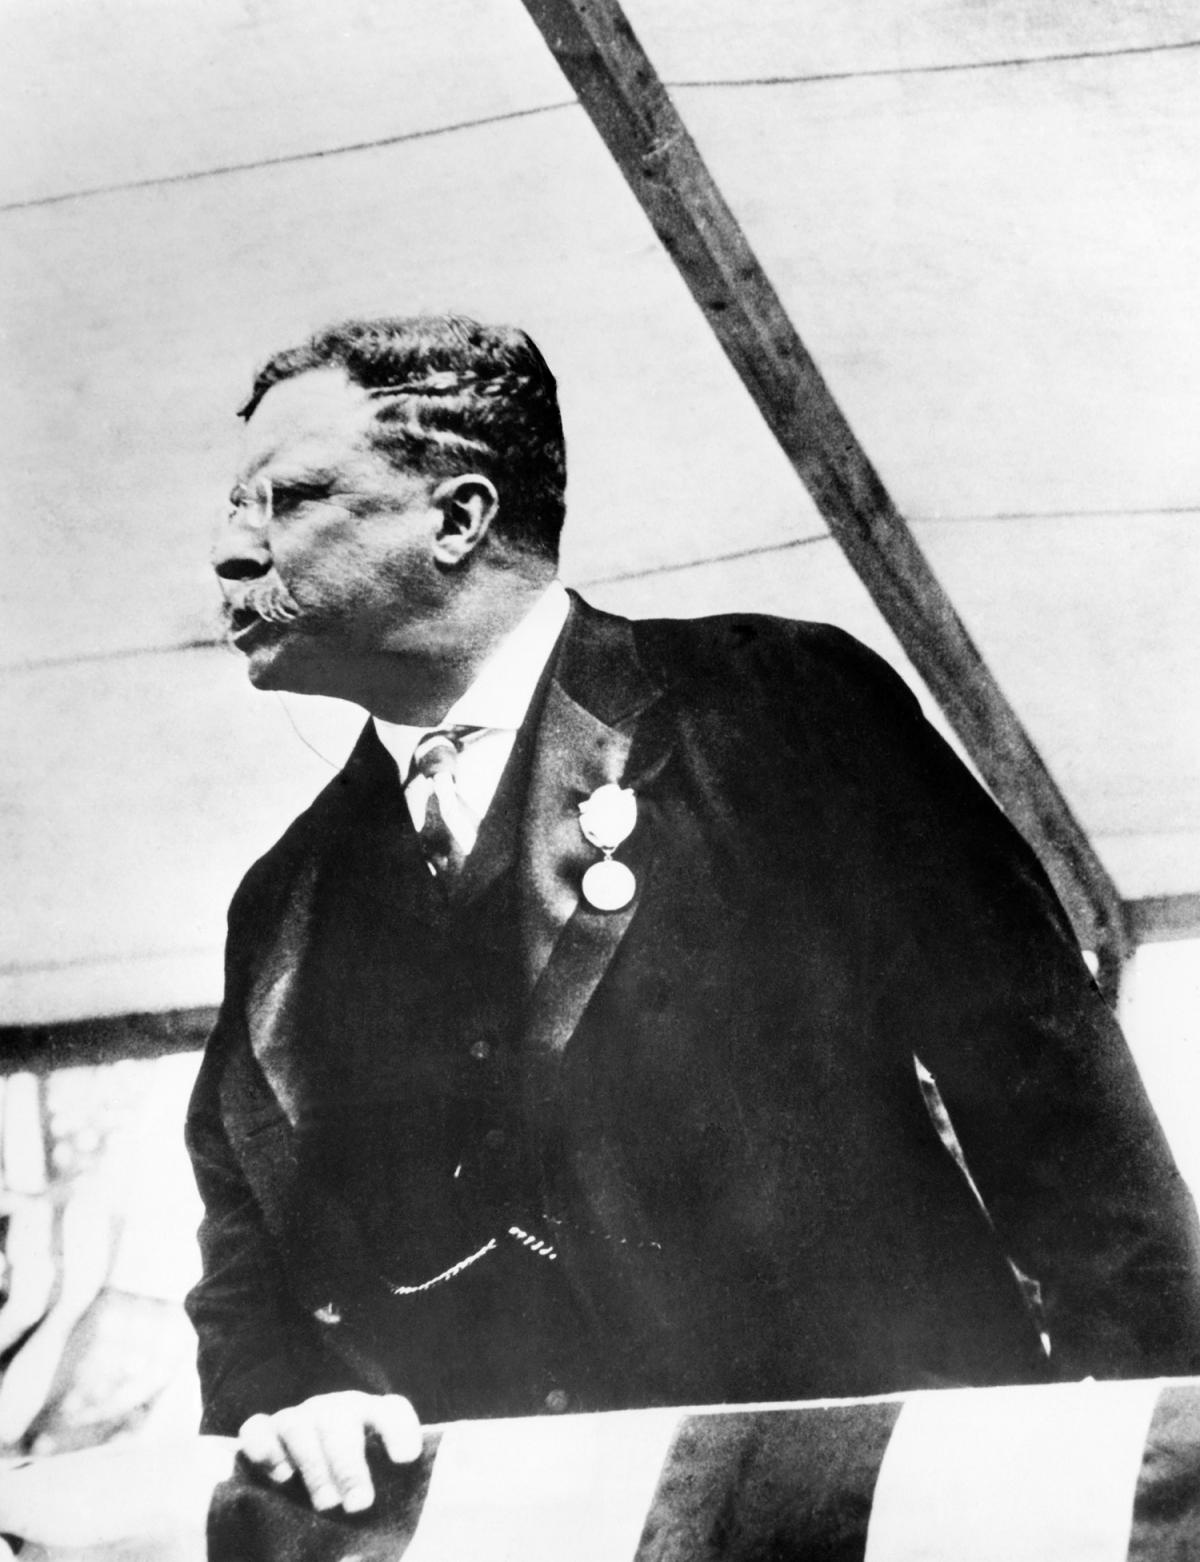 Teddy Roosevelt looking to his right, wearing a dark suit